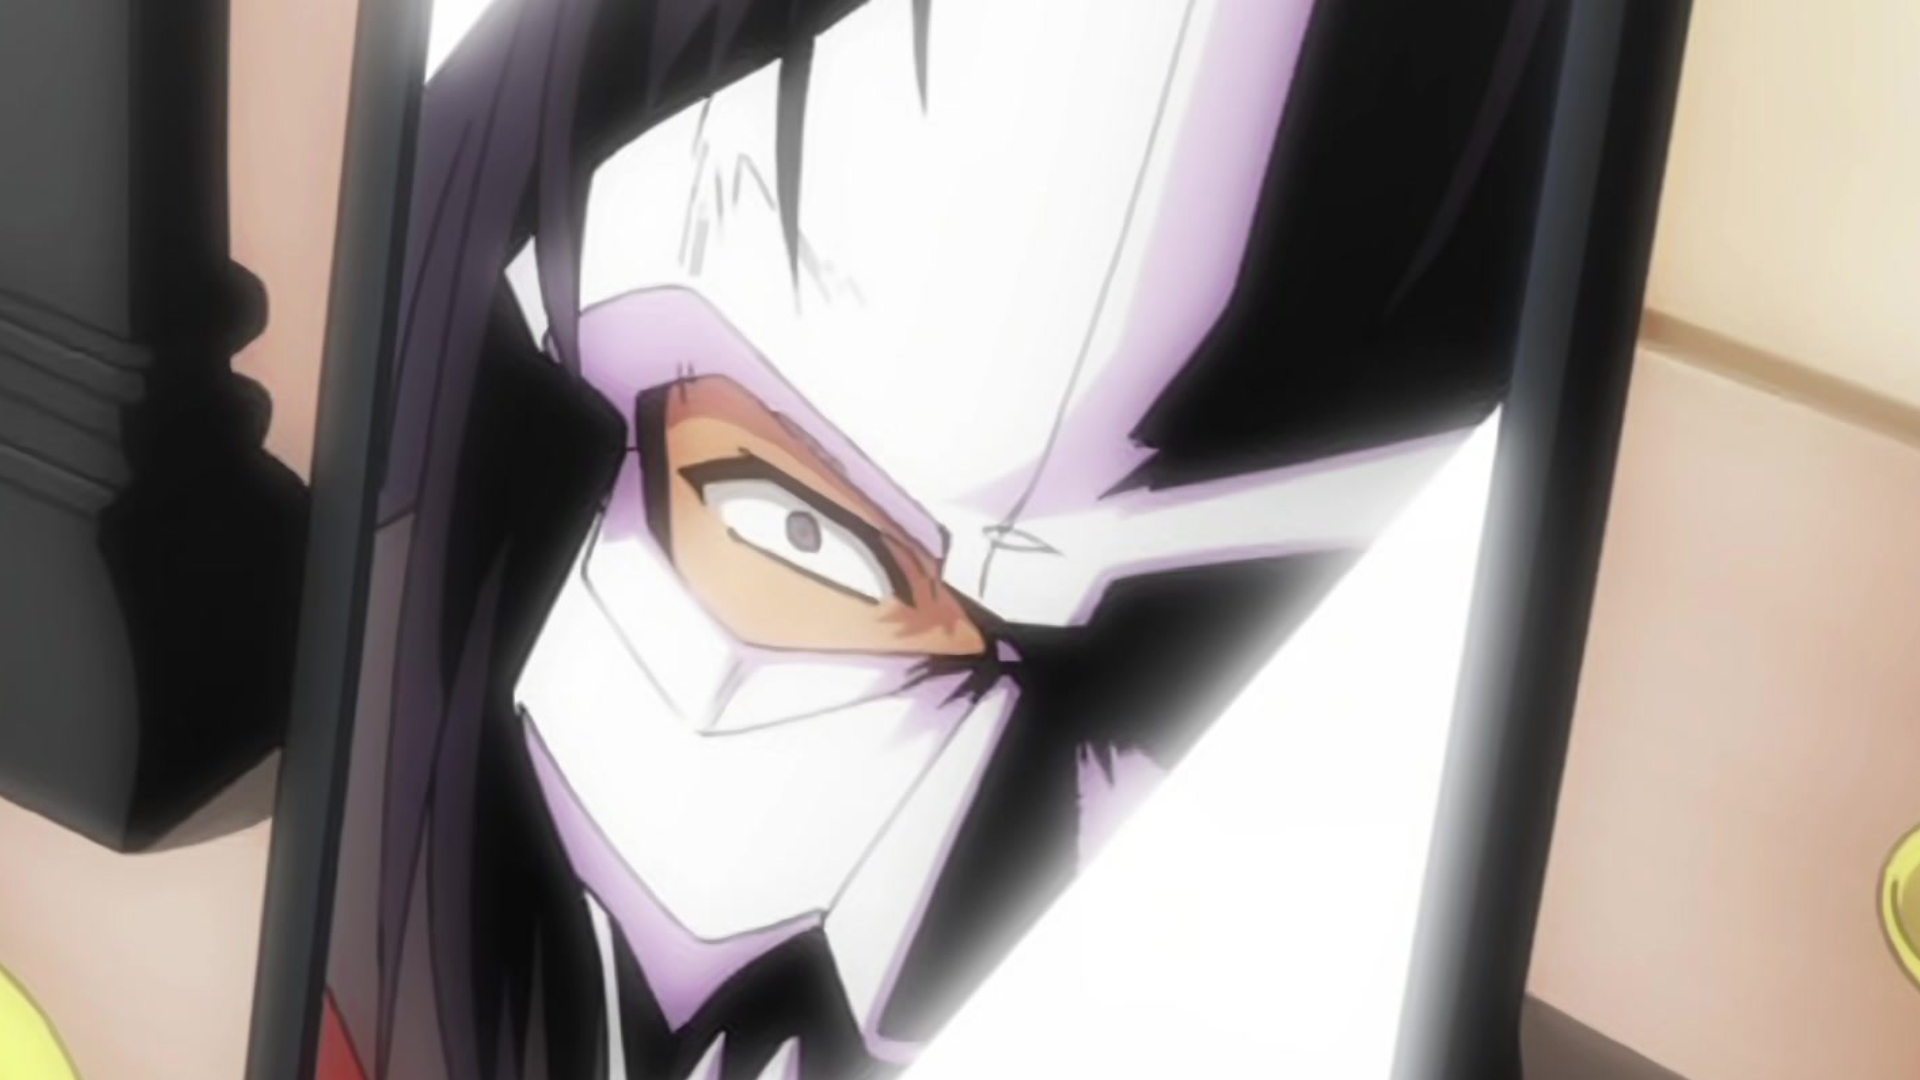 Review: Bleach Episode 3 Is Action-Packed & Heartbreaking